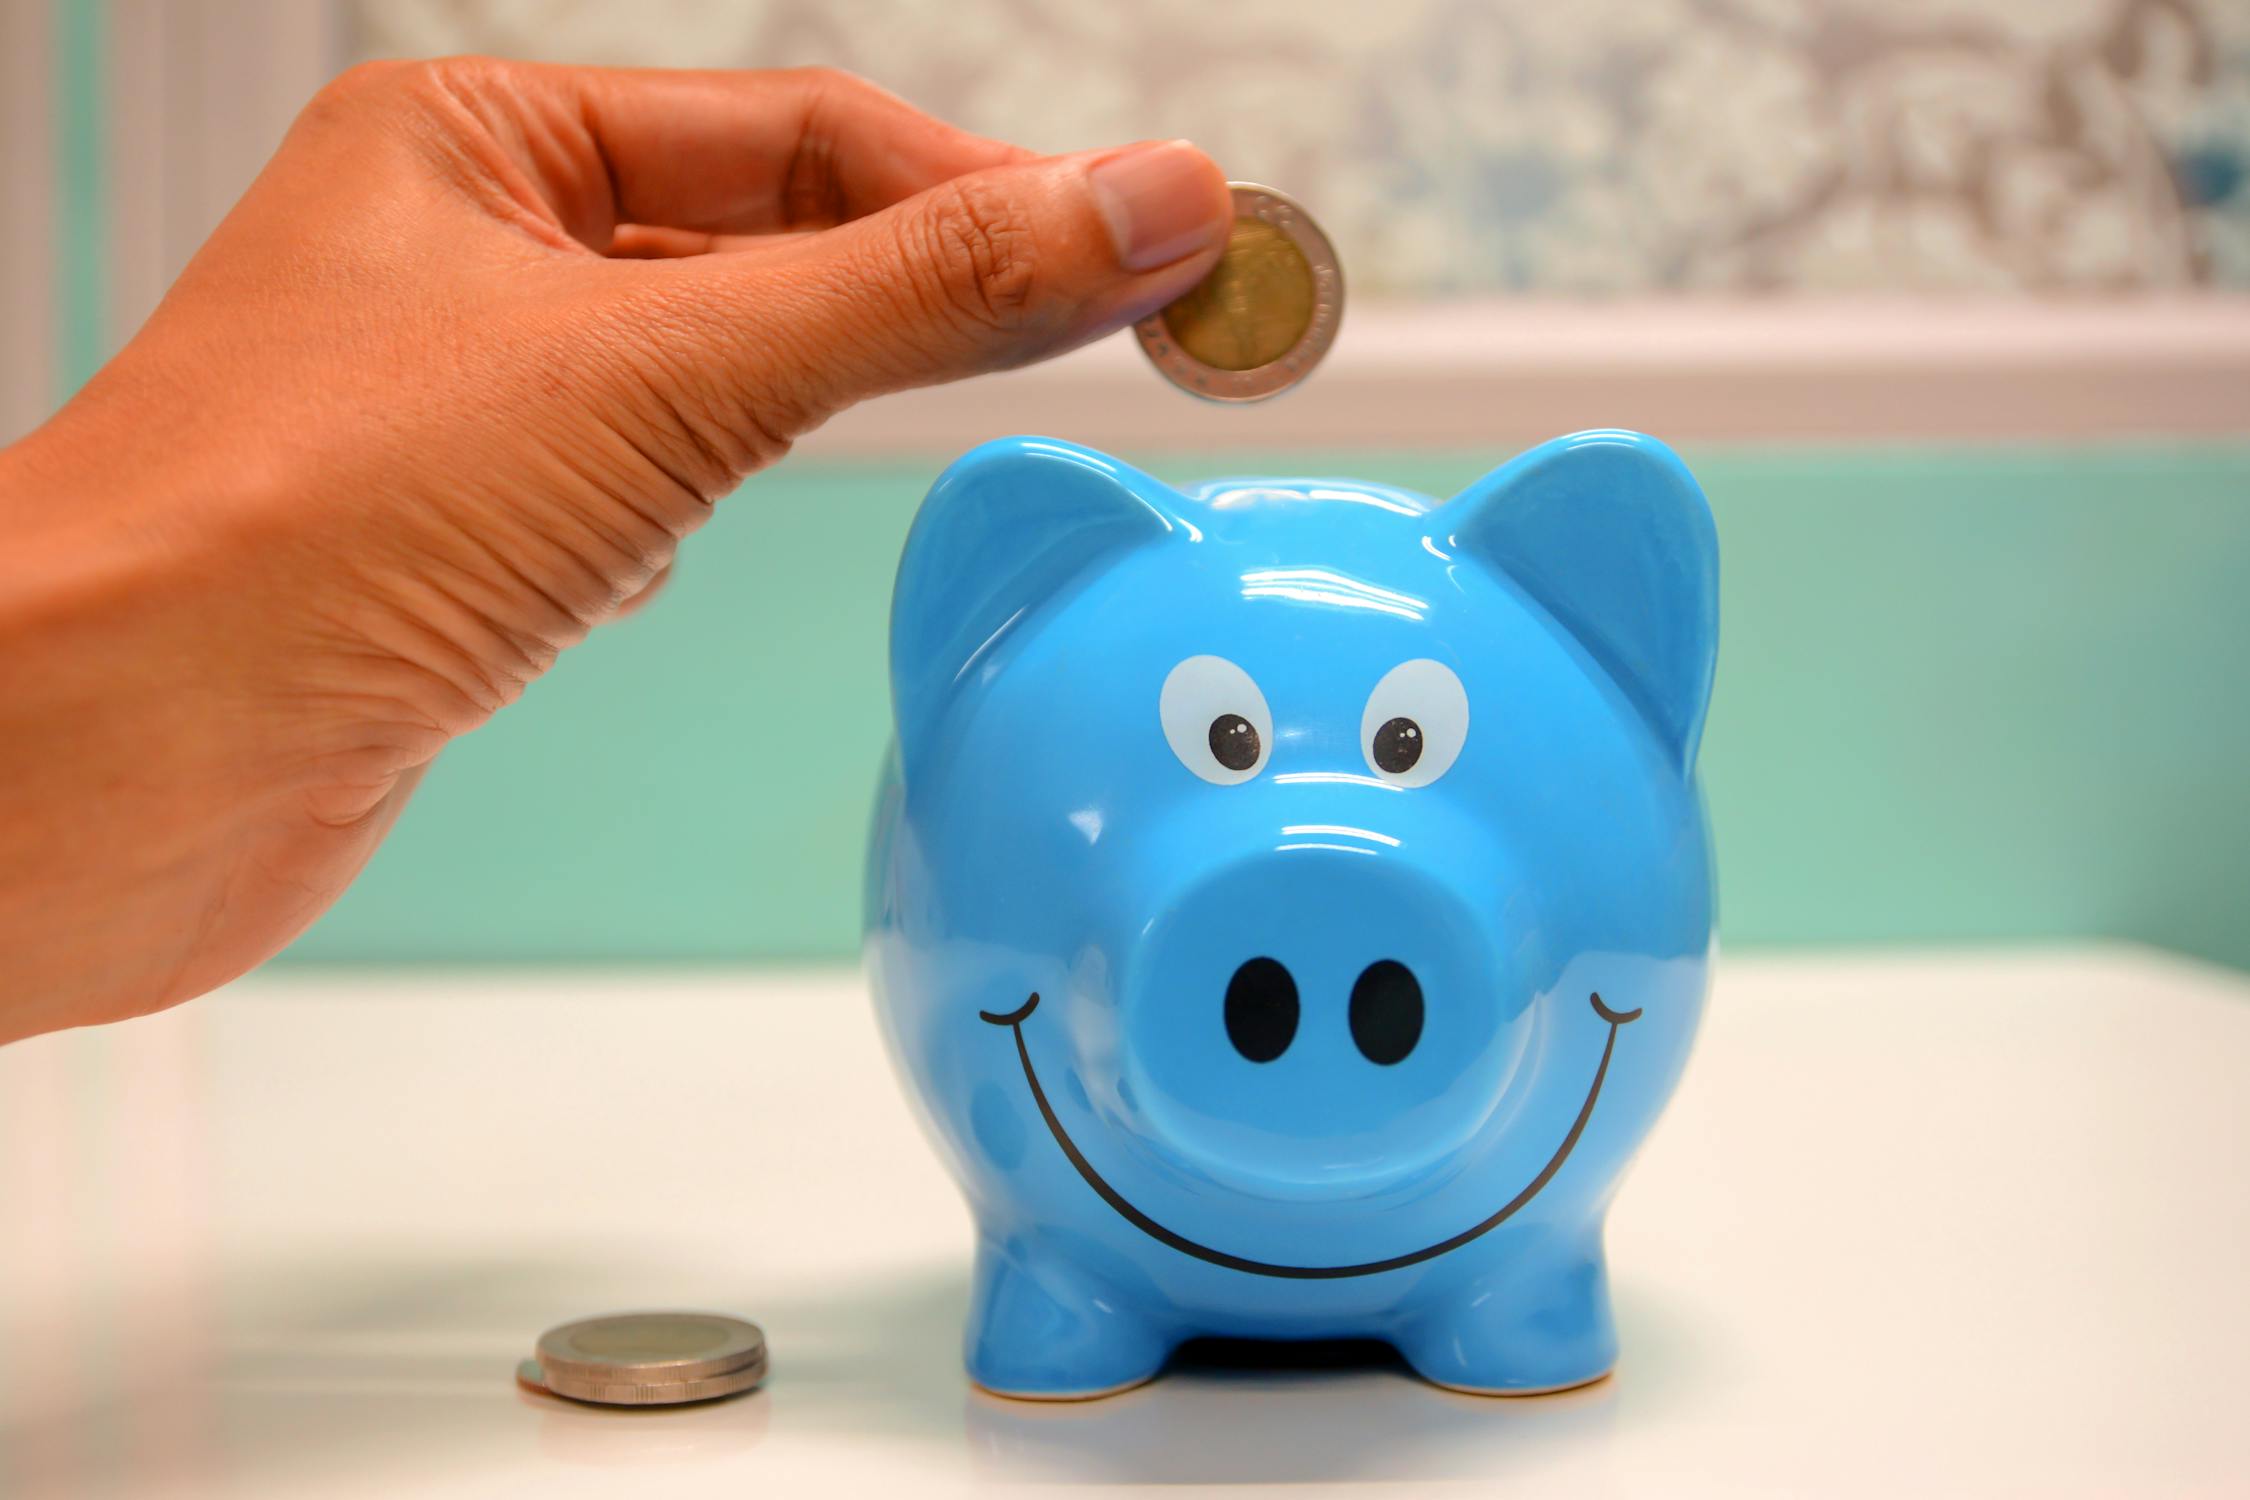 Money. Photo by maitree rimthong from Pexels: https://www.pexels.com/photo/person-putting-coin-in-a-piggy-bank-1602726/